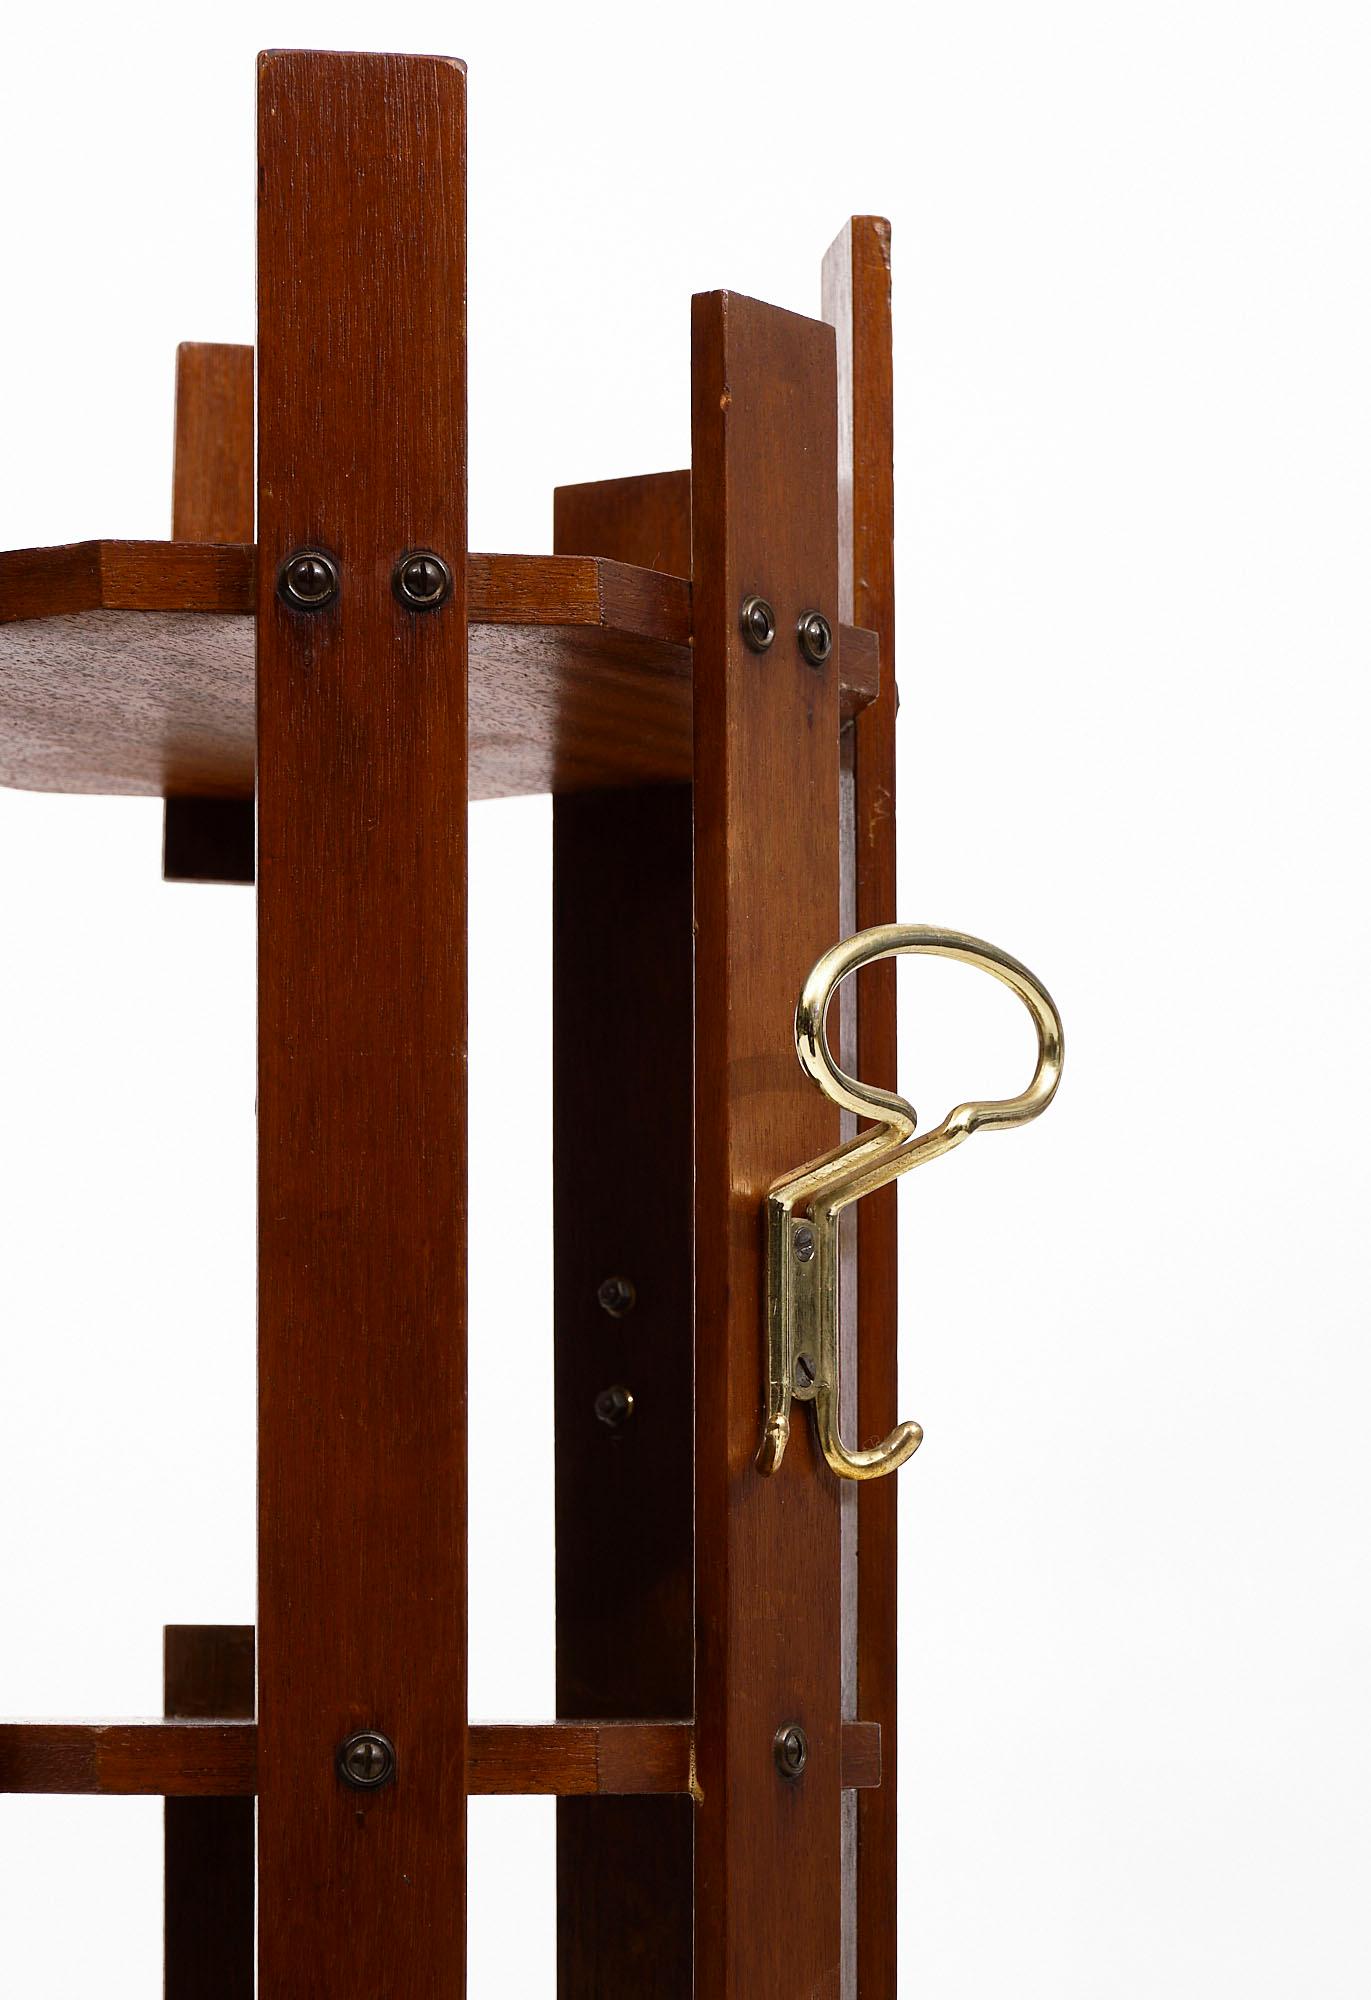 Italian vintage coat rack in the style of Carlo di Carli crafted of solid mahogany featuring seven shelves and solid gilt brass hooks.